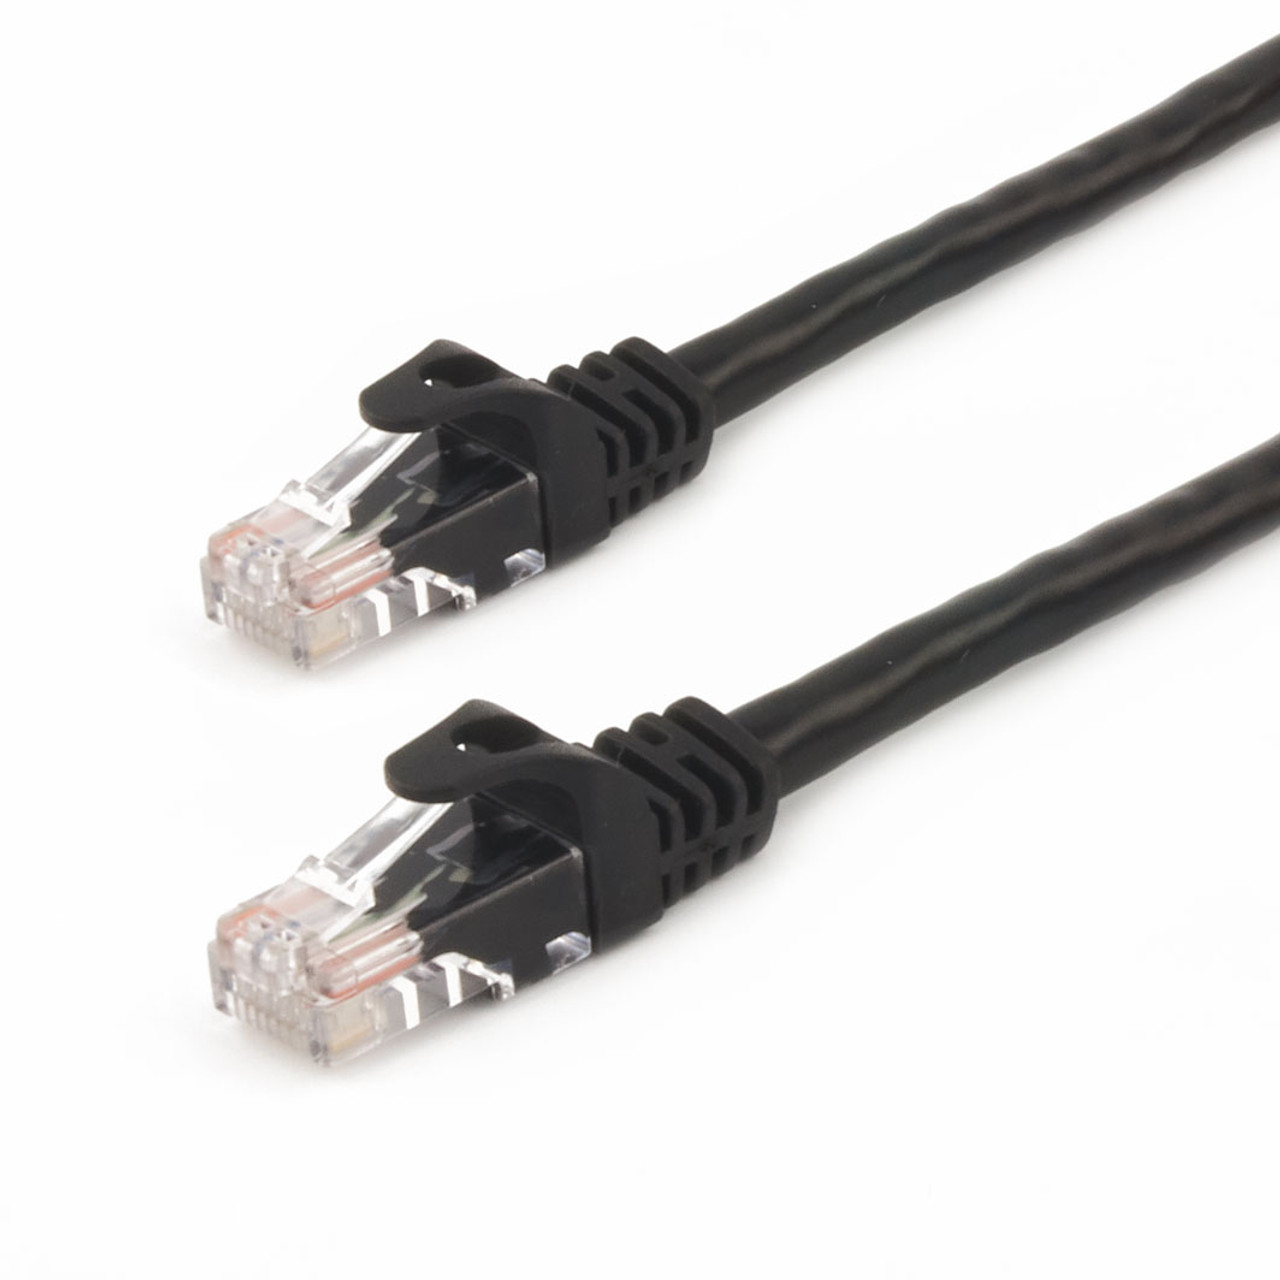 Cat6 Ethernet Patch Cable UTP 550Mhz 24awg 20ft